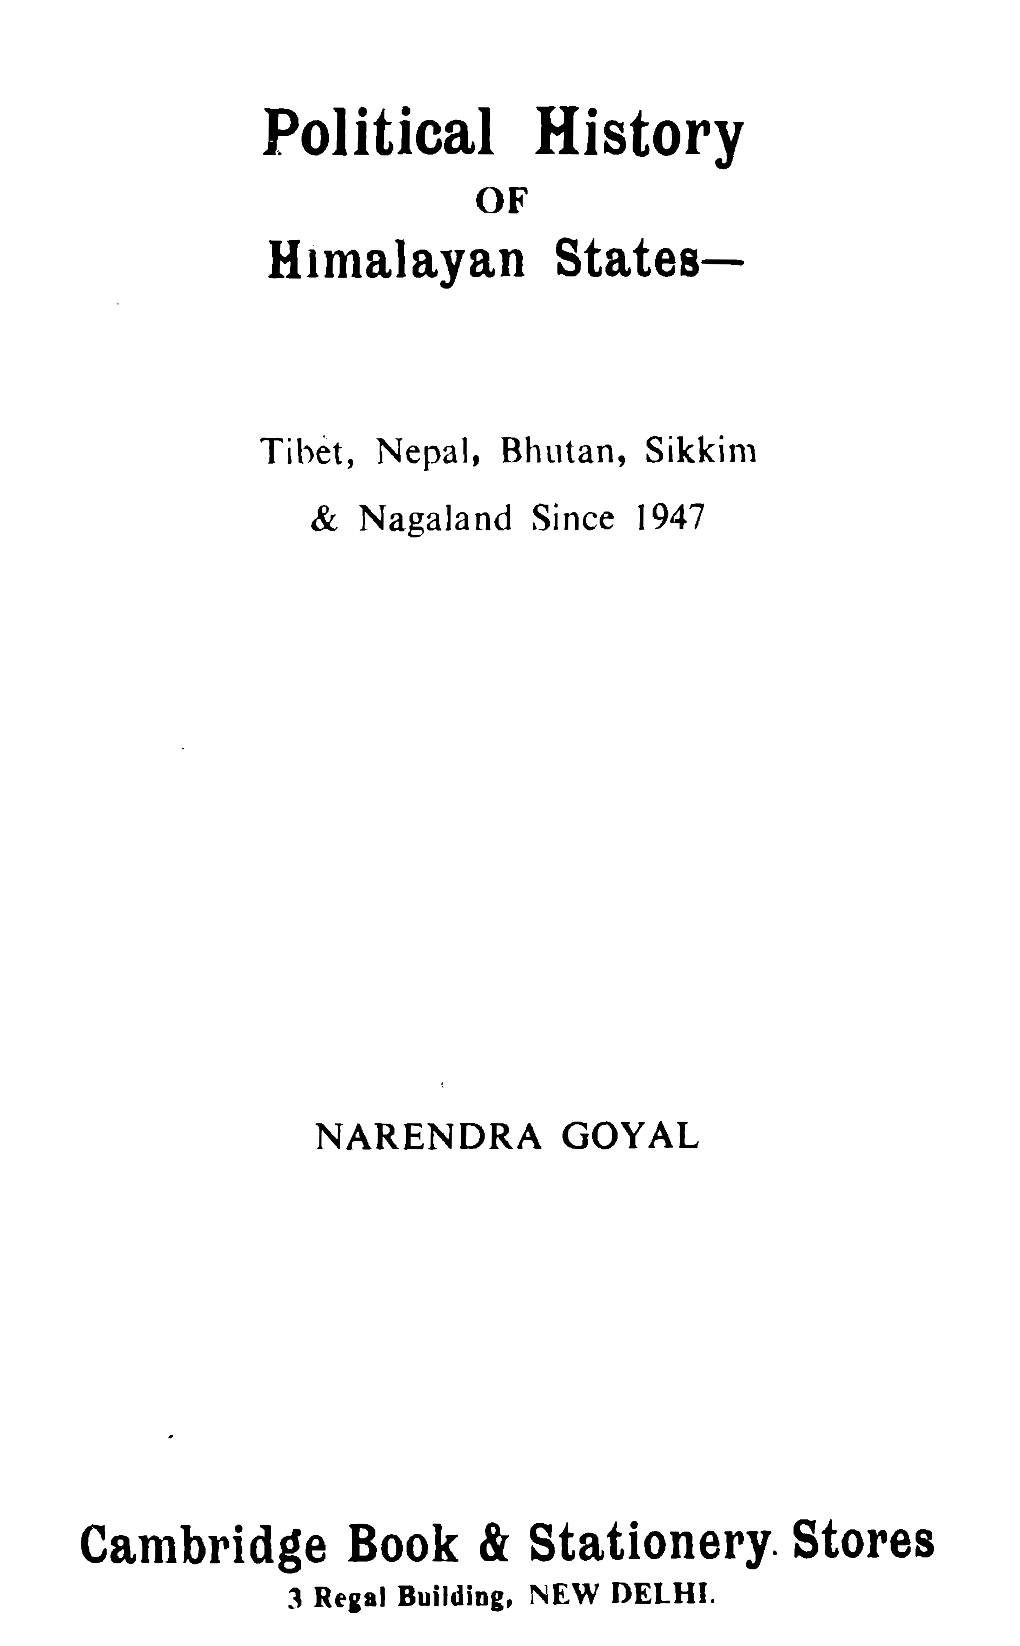 Political History of Himalayan States